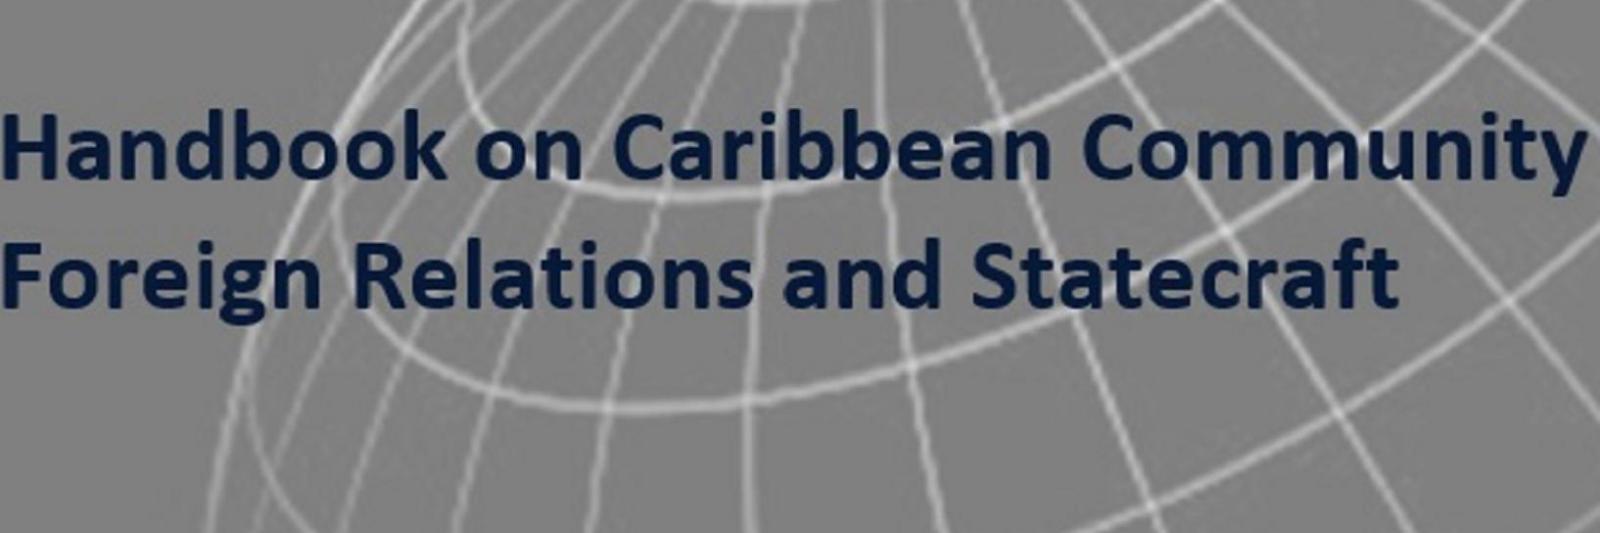 Handbook on Caribbean Community Foreign Relations and Statecraft